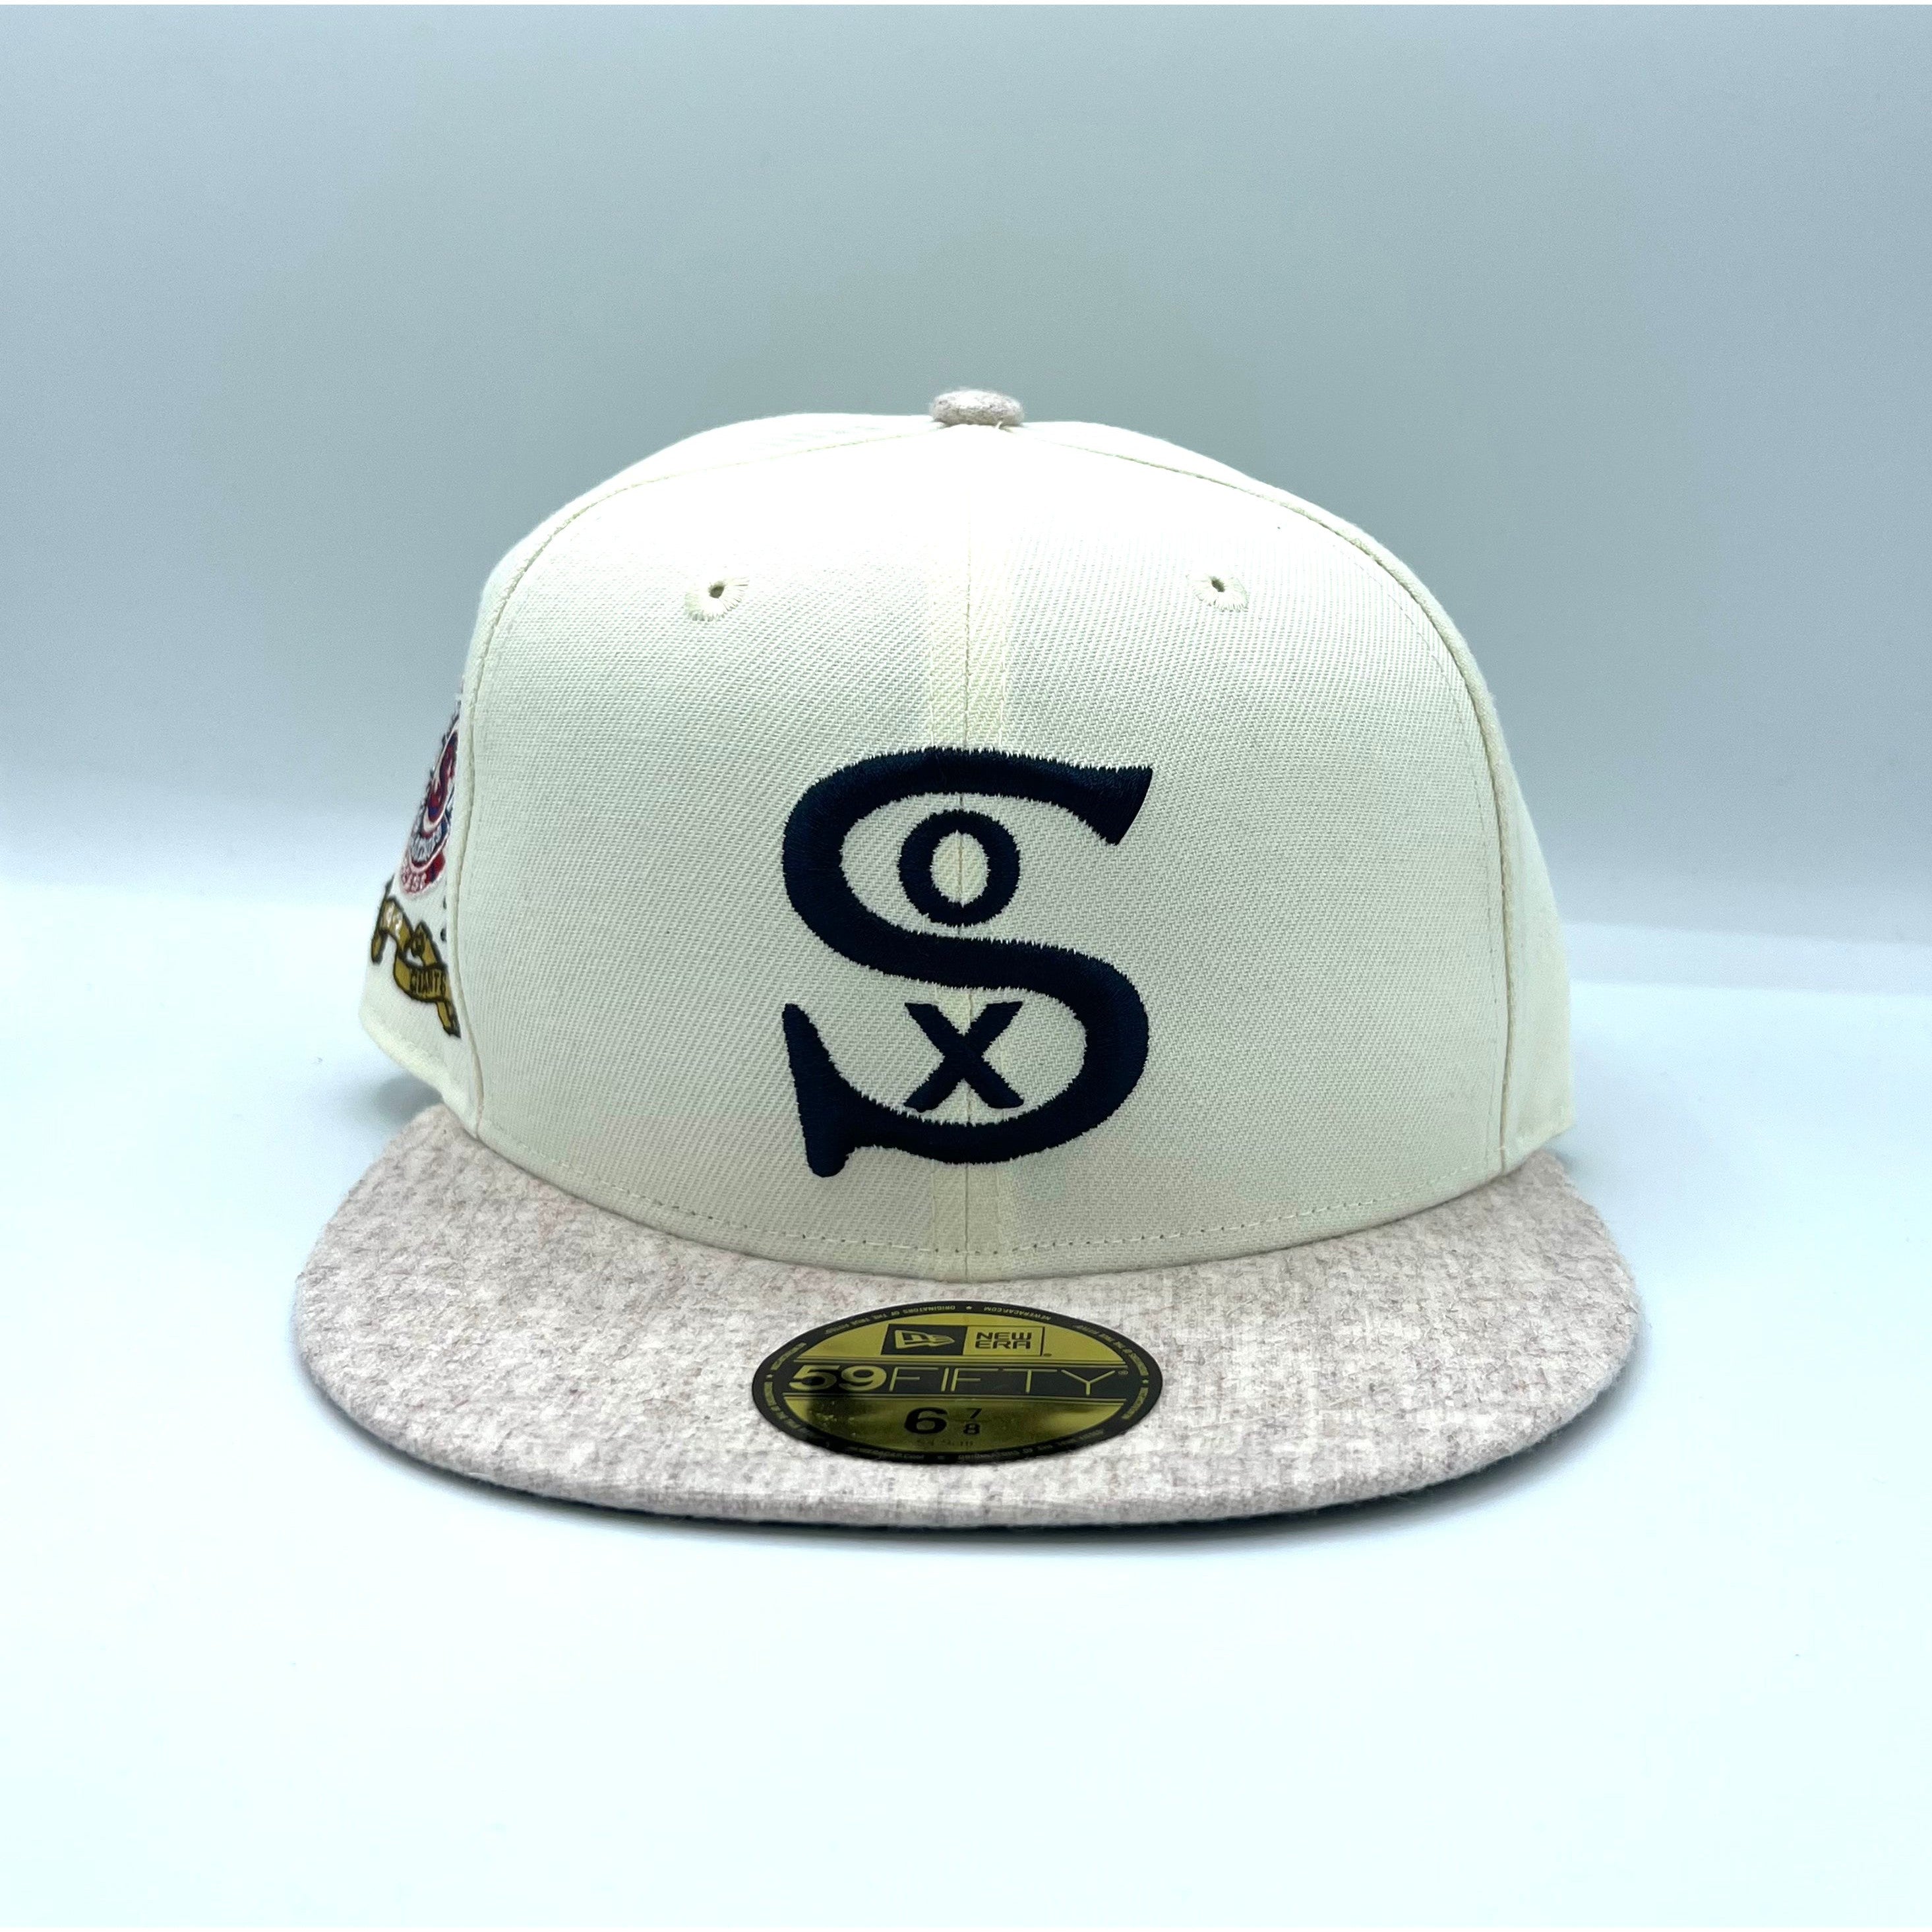 Chicago White Sox Fitted Cap